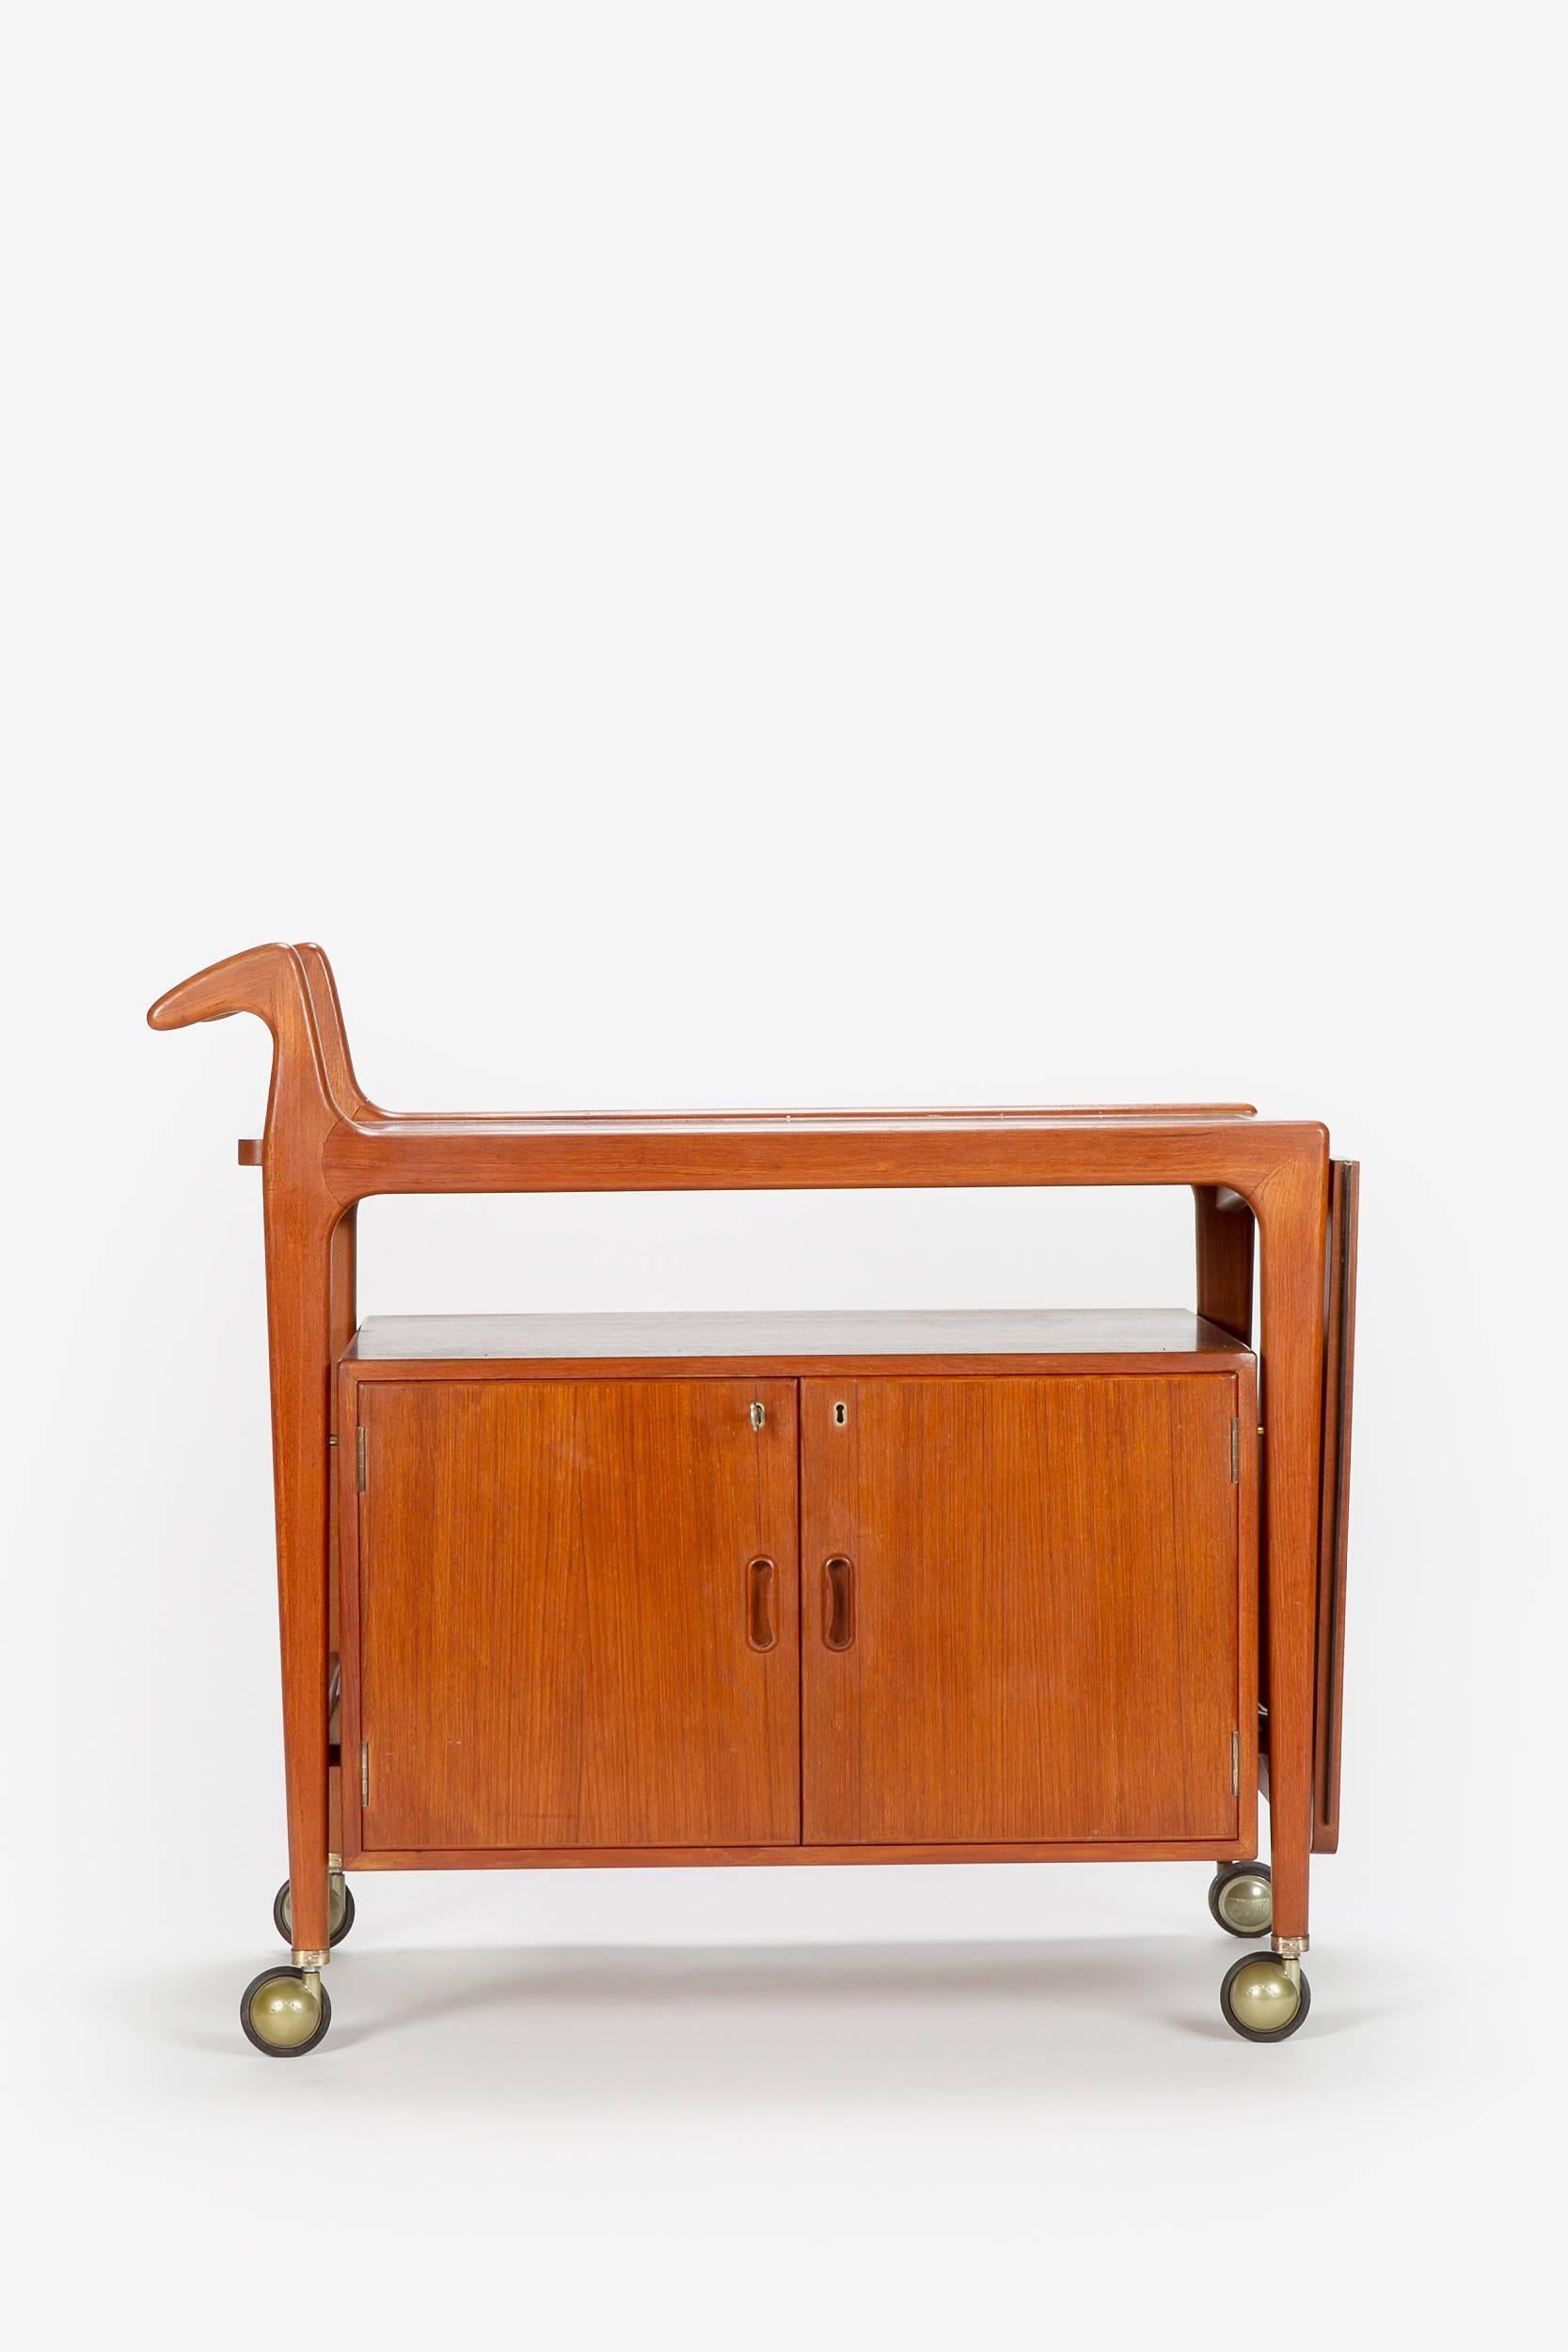 A very unique bar cart by the Danish manufacturer Falster Mobelfabrik in the 1960s. Organically shaped handles, top shelve has a black Formica surface and can be fold up and down, bar cabinet with original key.
Measures 142cm when extended, the